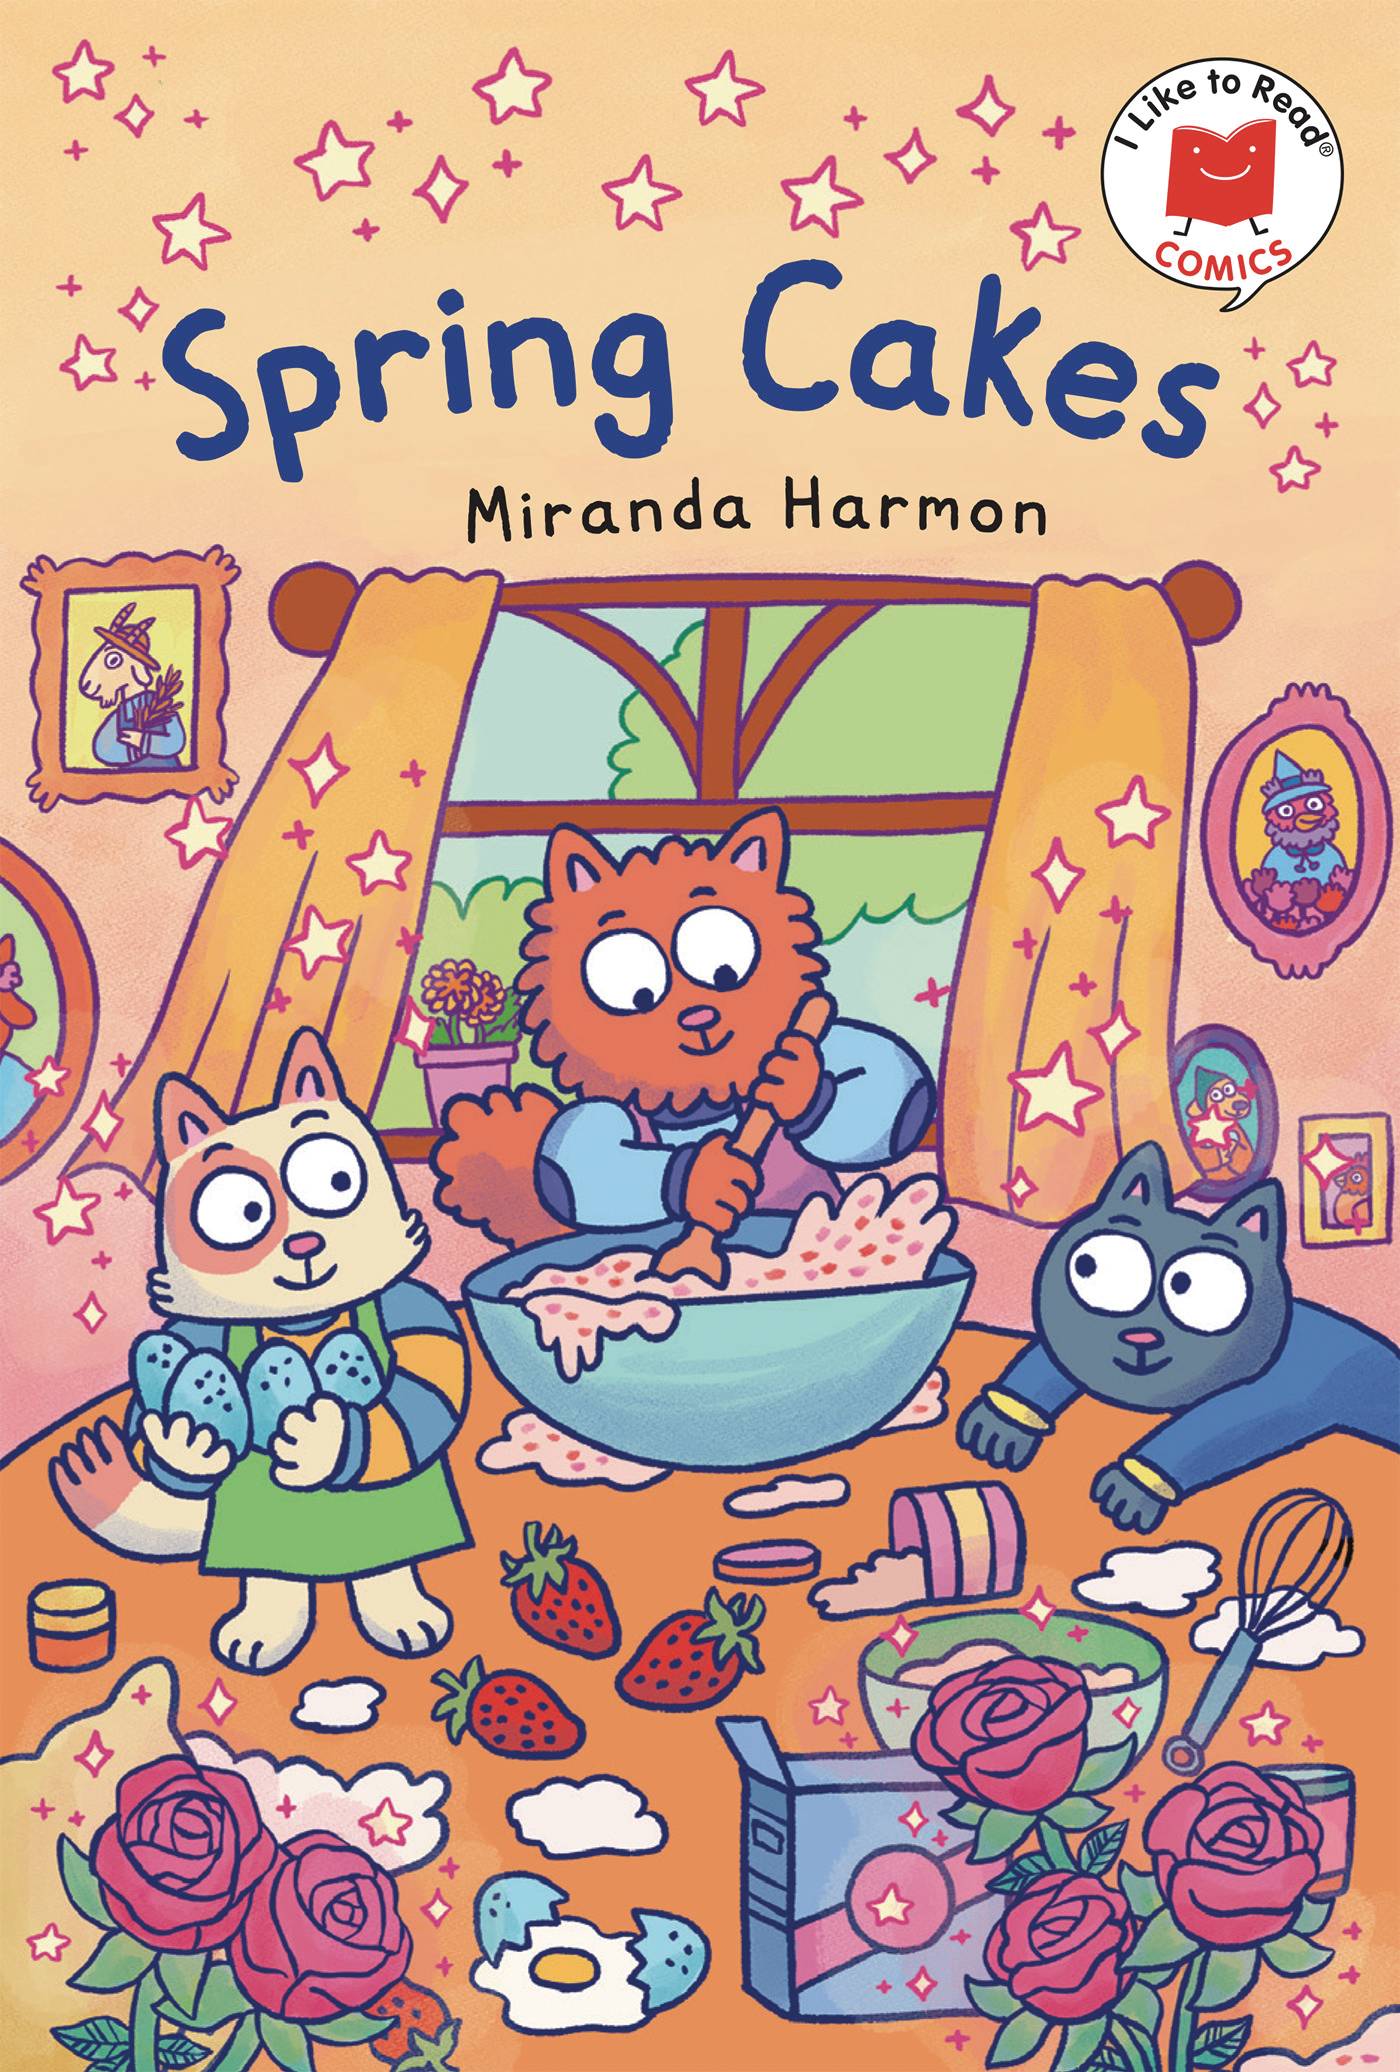 A fluffy ginger cat wearing an apron mixes a large bowlful of pink mixture atop a table. A black cat wearing a blue top leans over, watching intently. A white and orange cat in a green dress stands on top of the table, holding four blue speckled eggs ready. Also on the table are a mess of kitchen tools, strawberries, spilled flour and a cracked egg. In the background is a wall with lots of pictures of other animals wearing clothes, and a window overlooking some trees. 